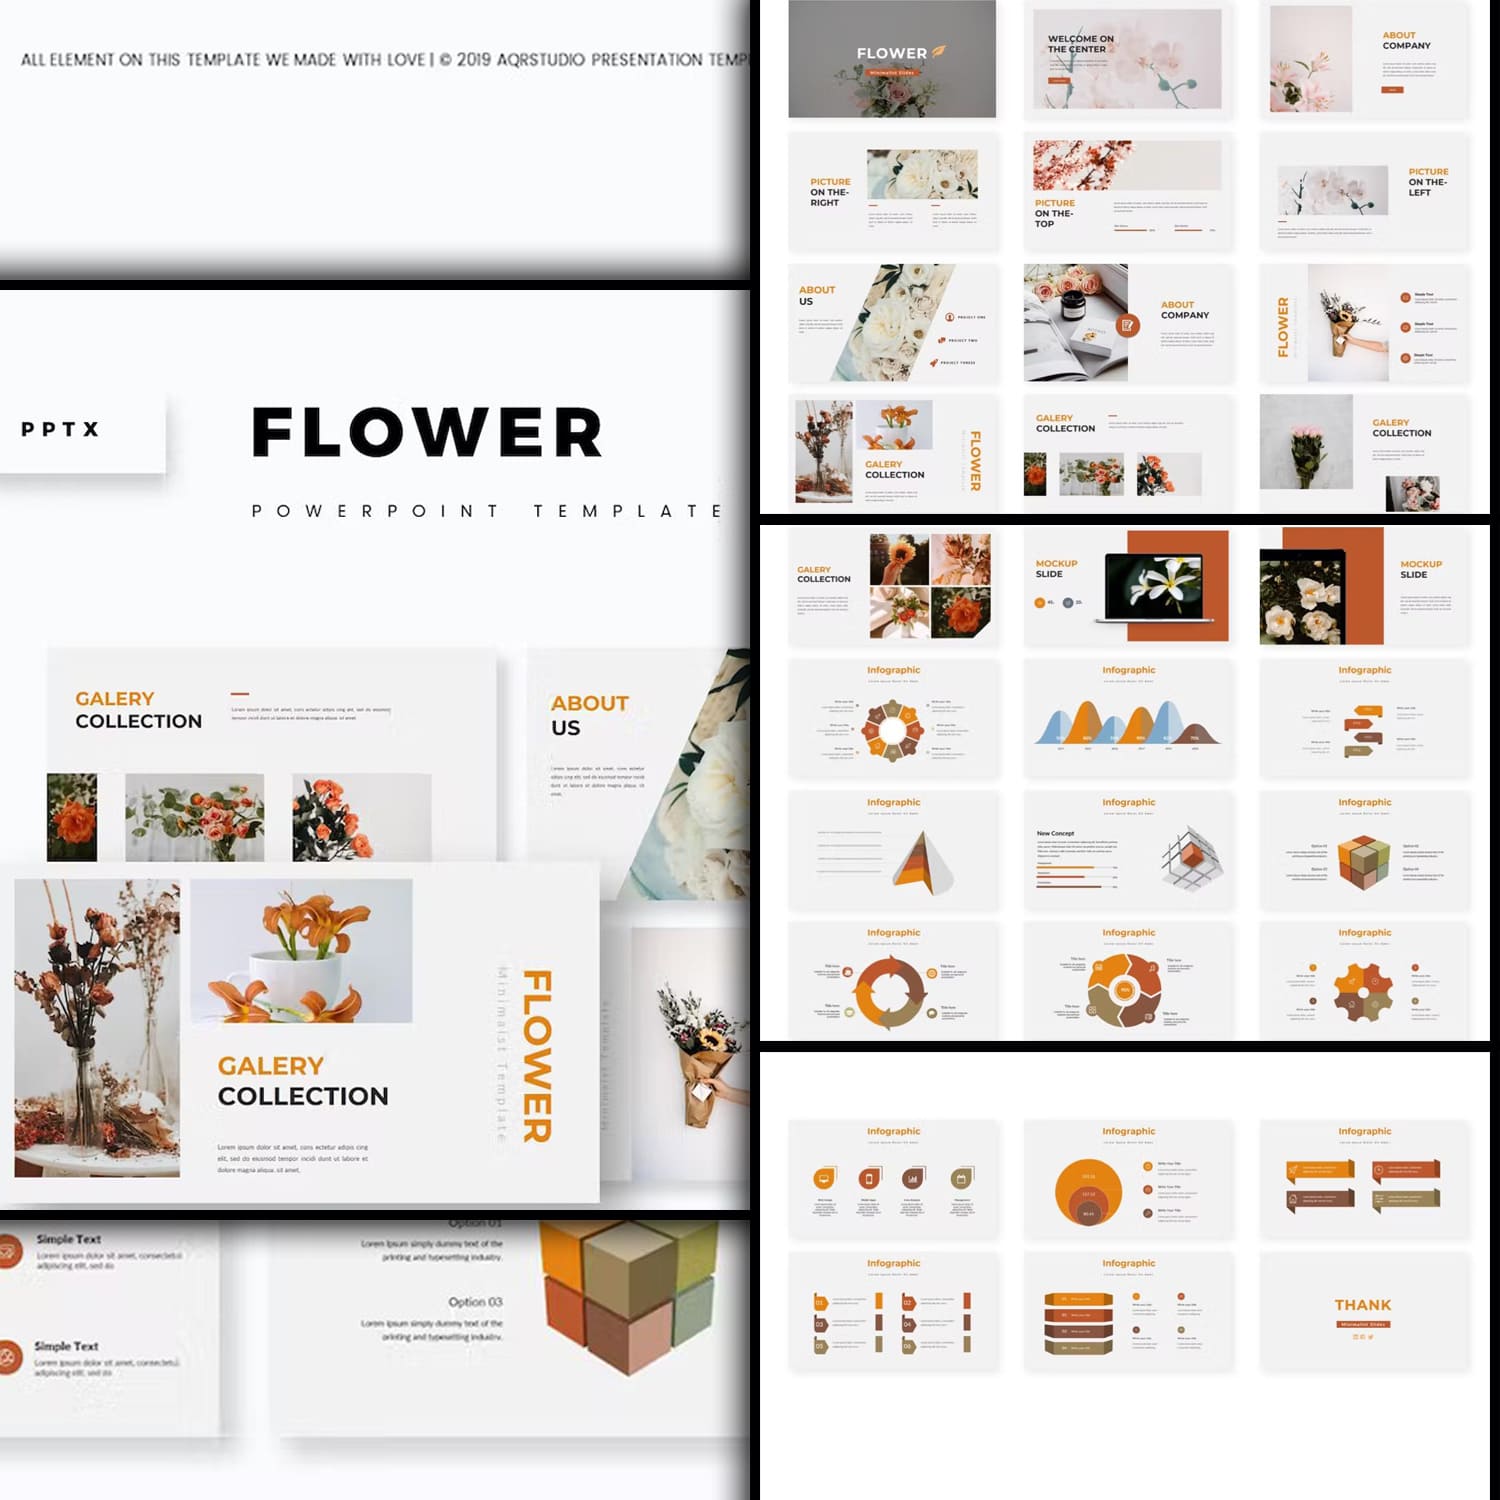 Pack of images of adorable presentation template slides on the theme of flowers.